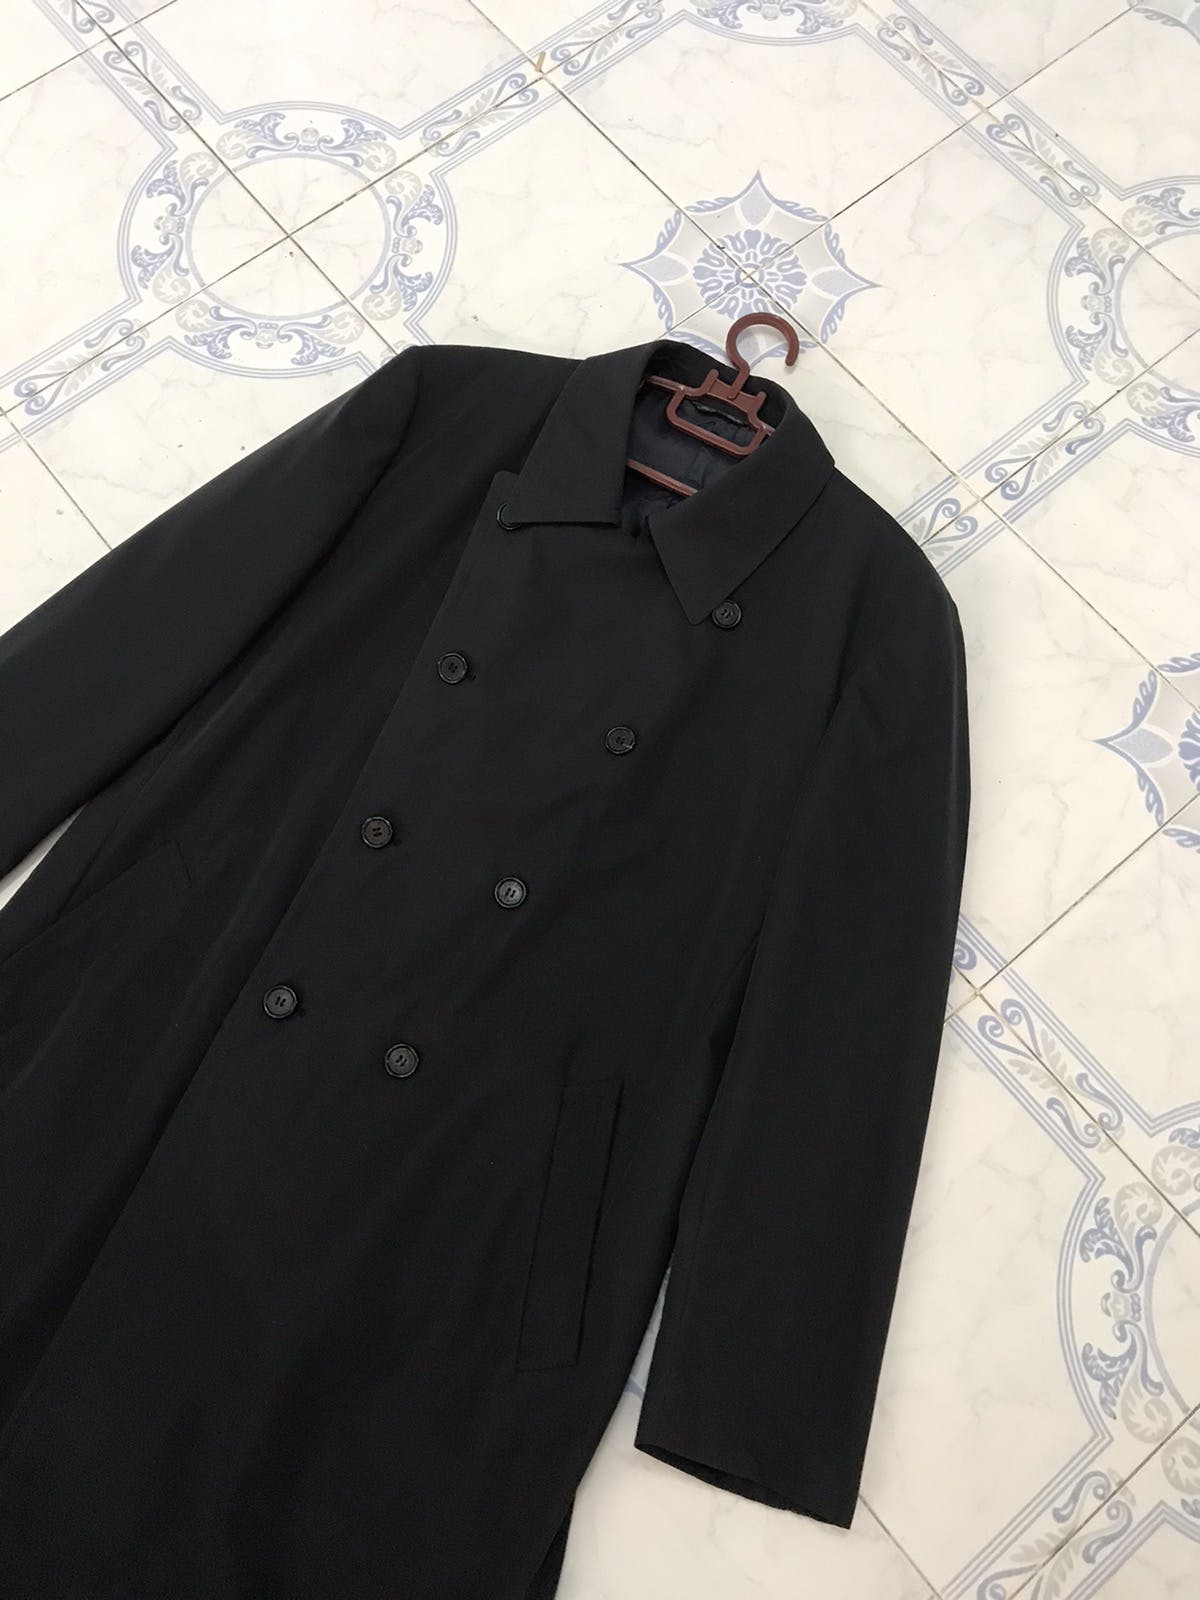 Gucci Long Coat/Jacket Made in Italy - 13